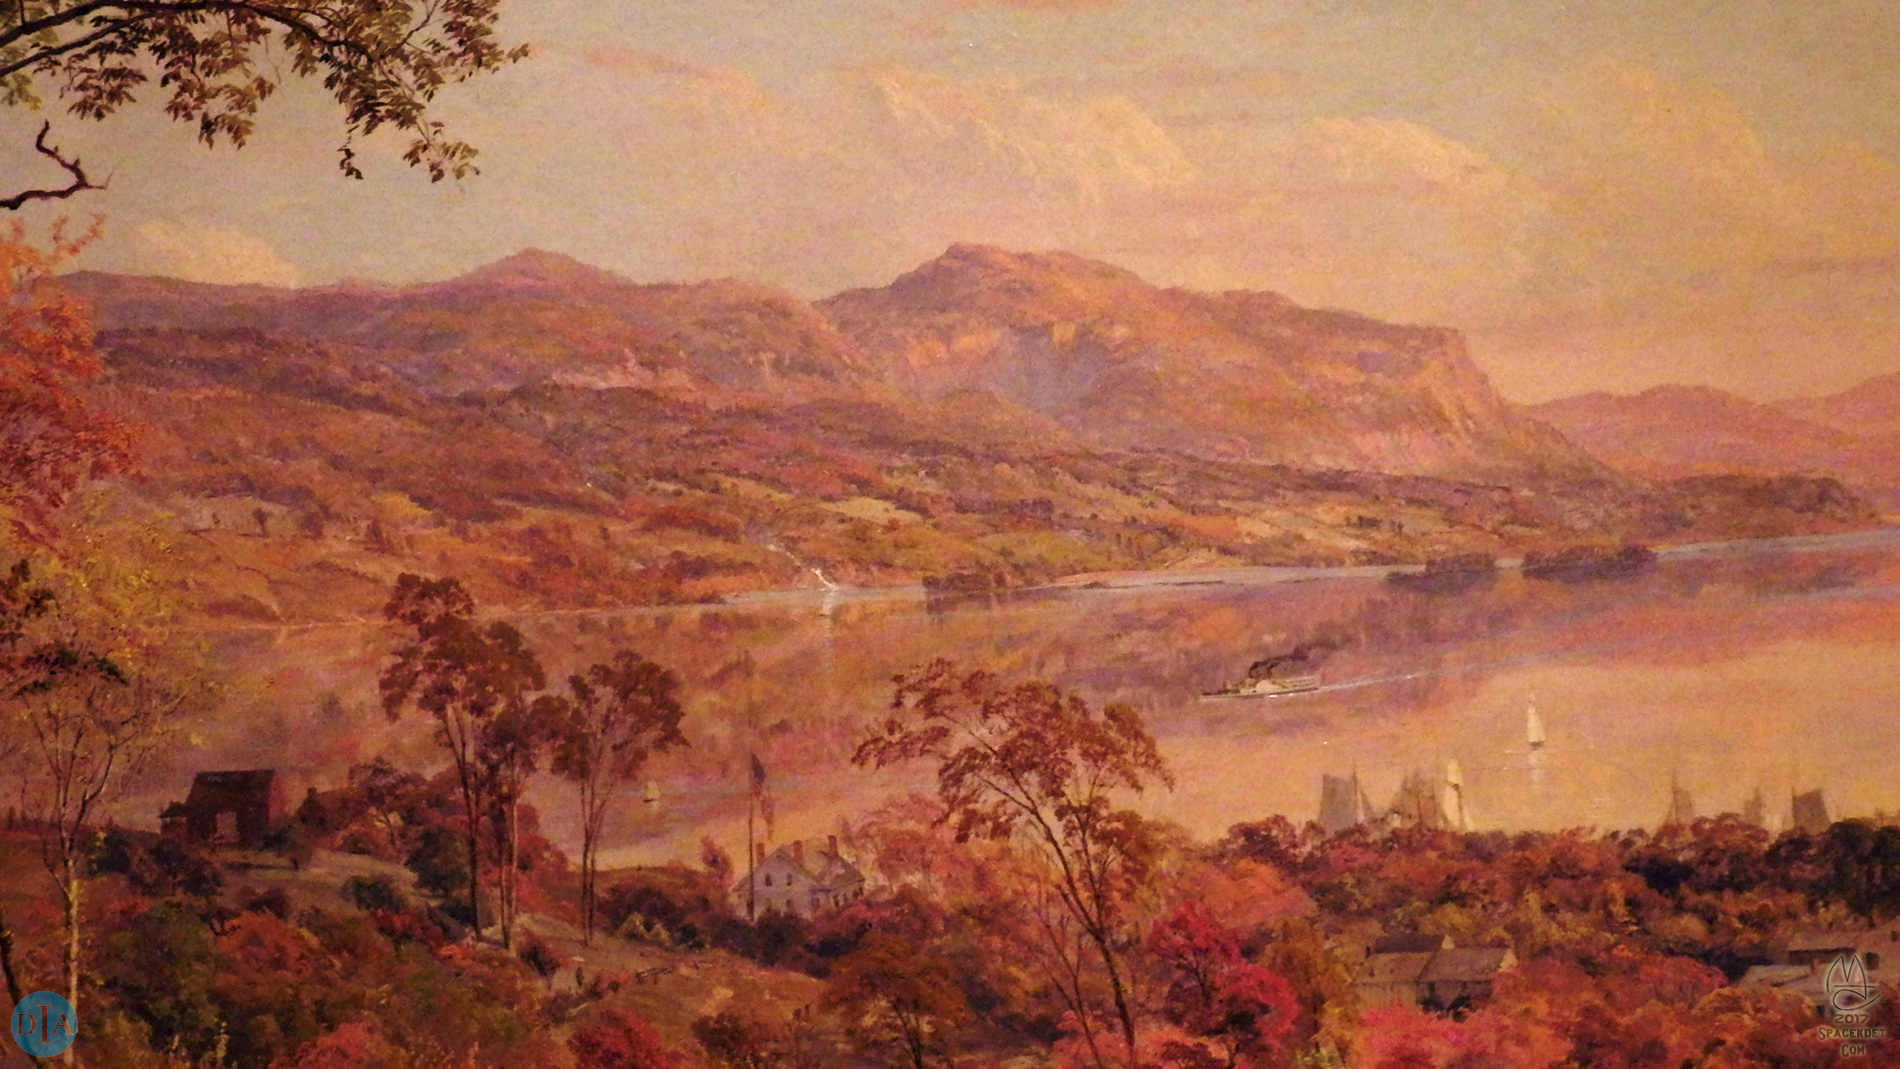 Indian Summer, detail, by Jasper Francis Cropsey, 1866.